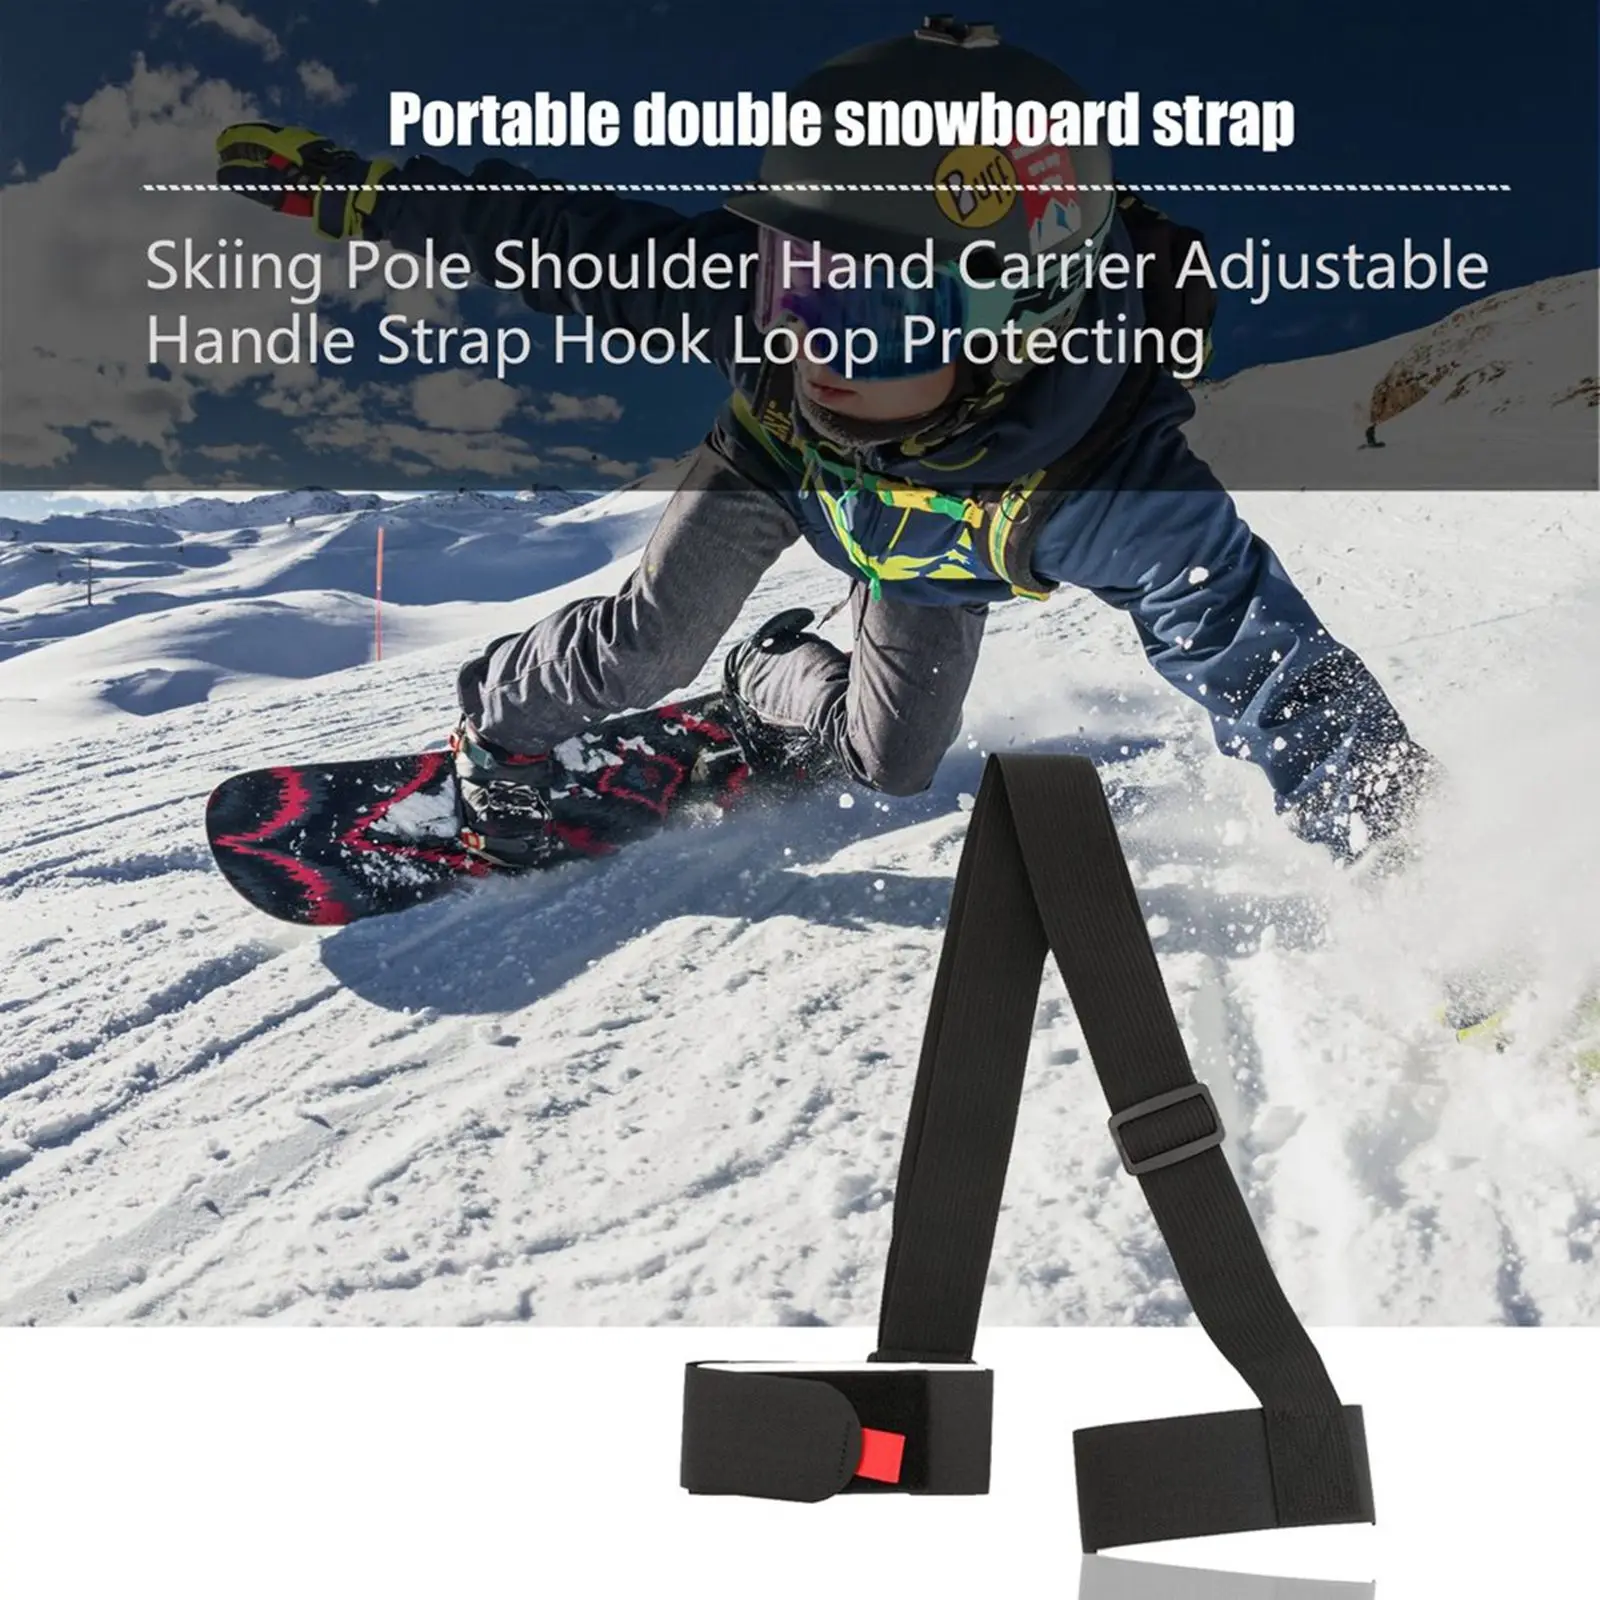 Skis Snowboard Shoulder Carriers Snowboarding Nylon Straps Ski Accessory Hot New 